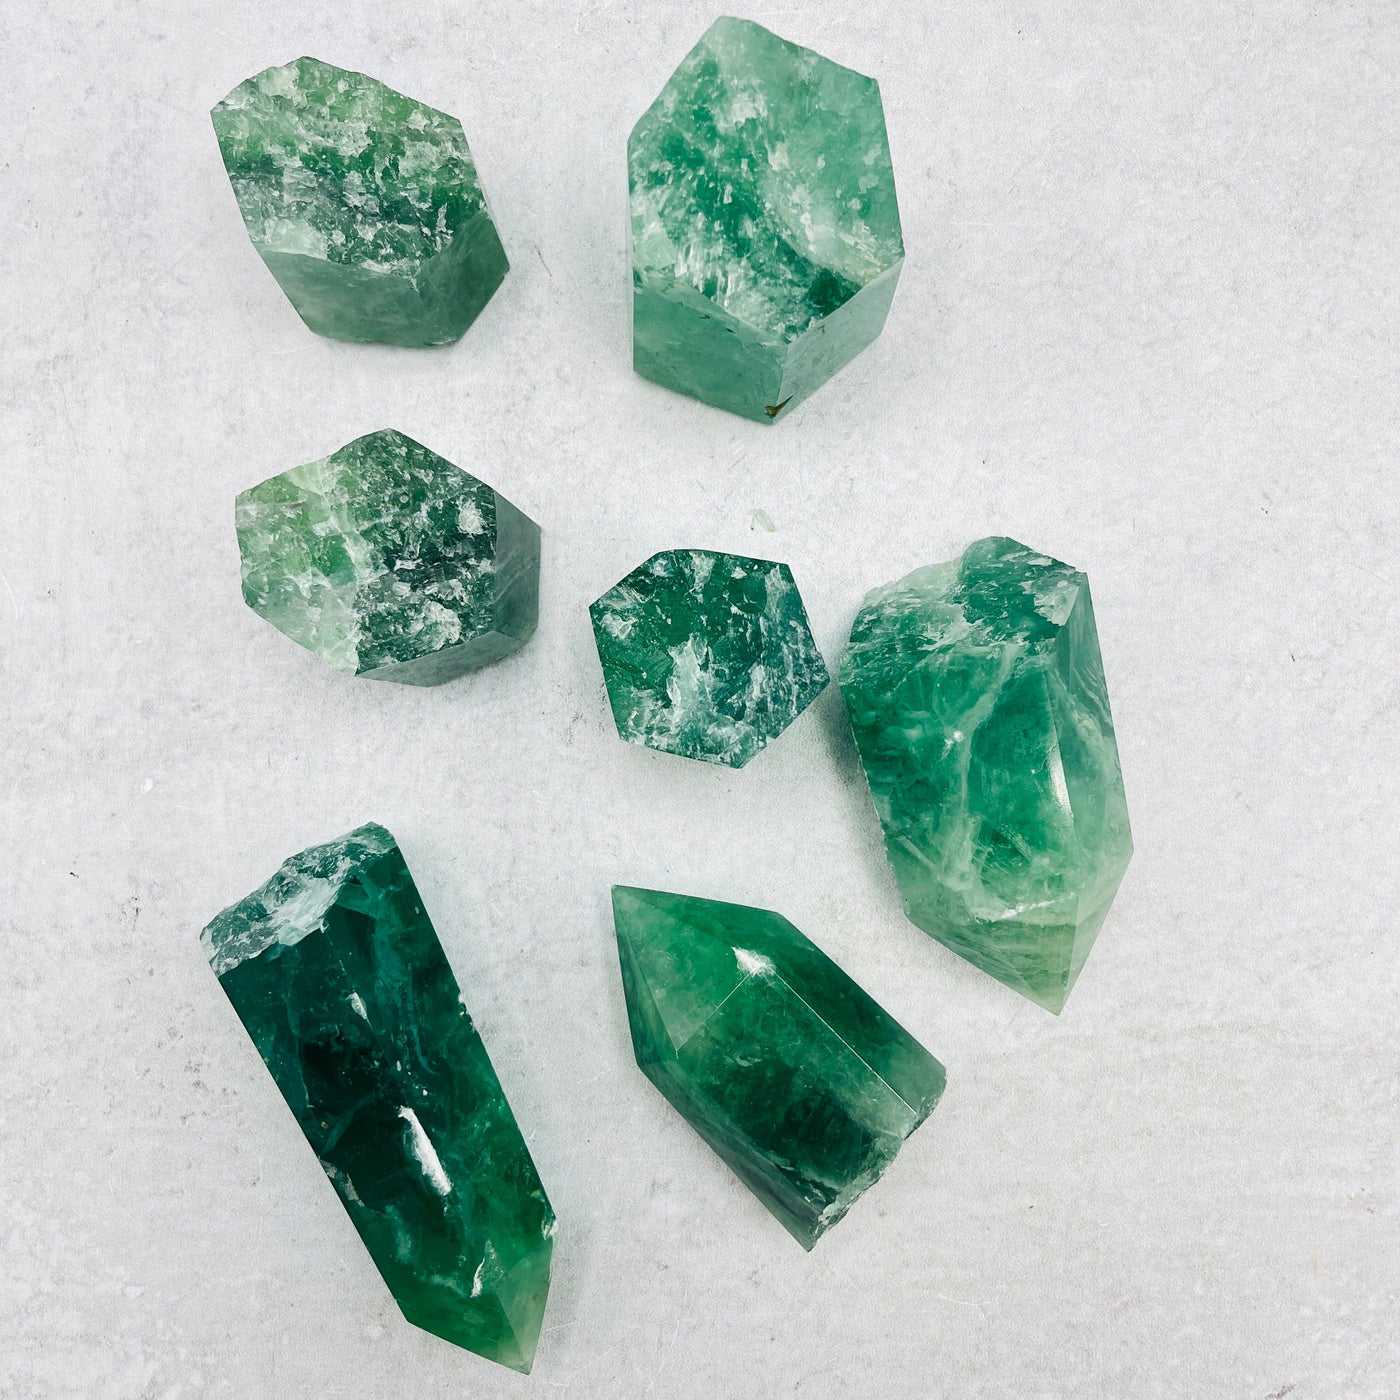 Green Fluorite Crafters 2.5lb Bag - Aerial View